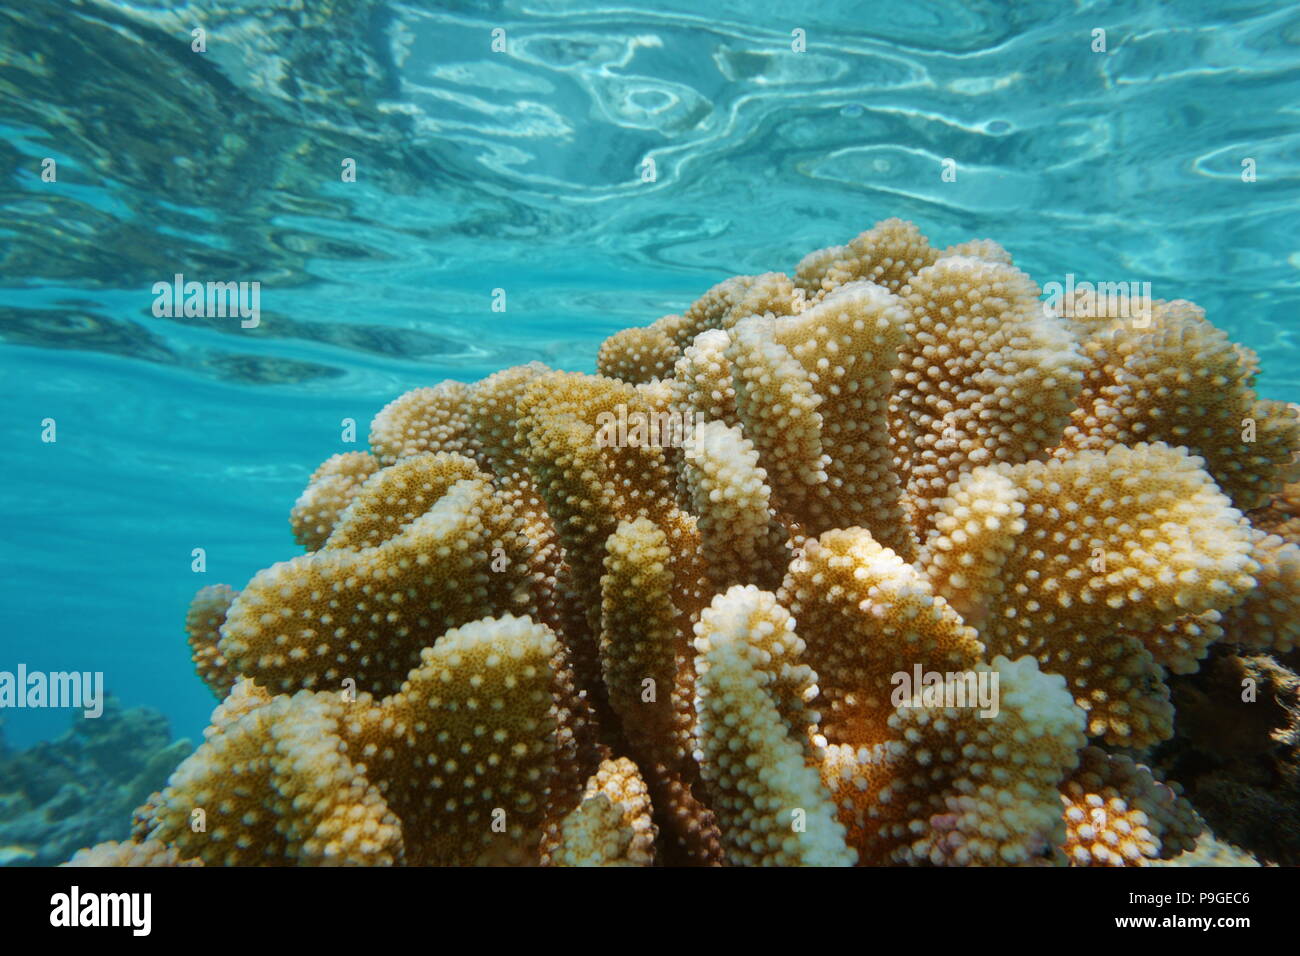 Close up of Pocillopora coral underwater, commonly called cauliflower coral, Pacific ocean, Polynesia, American Samoa Stock Photo